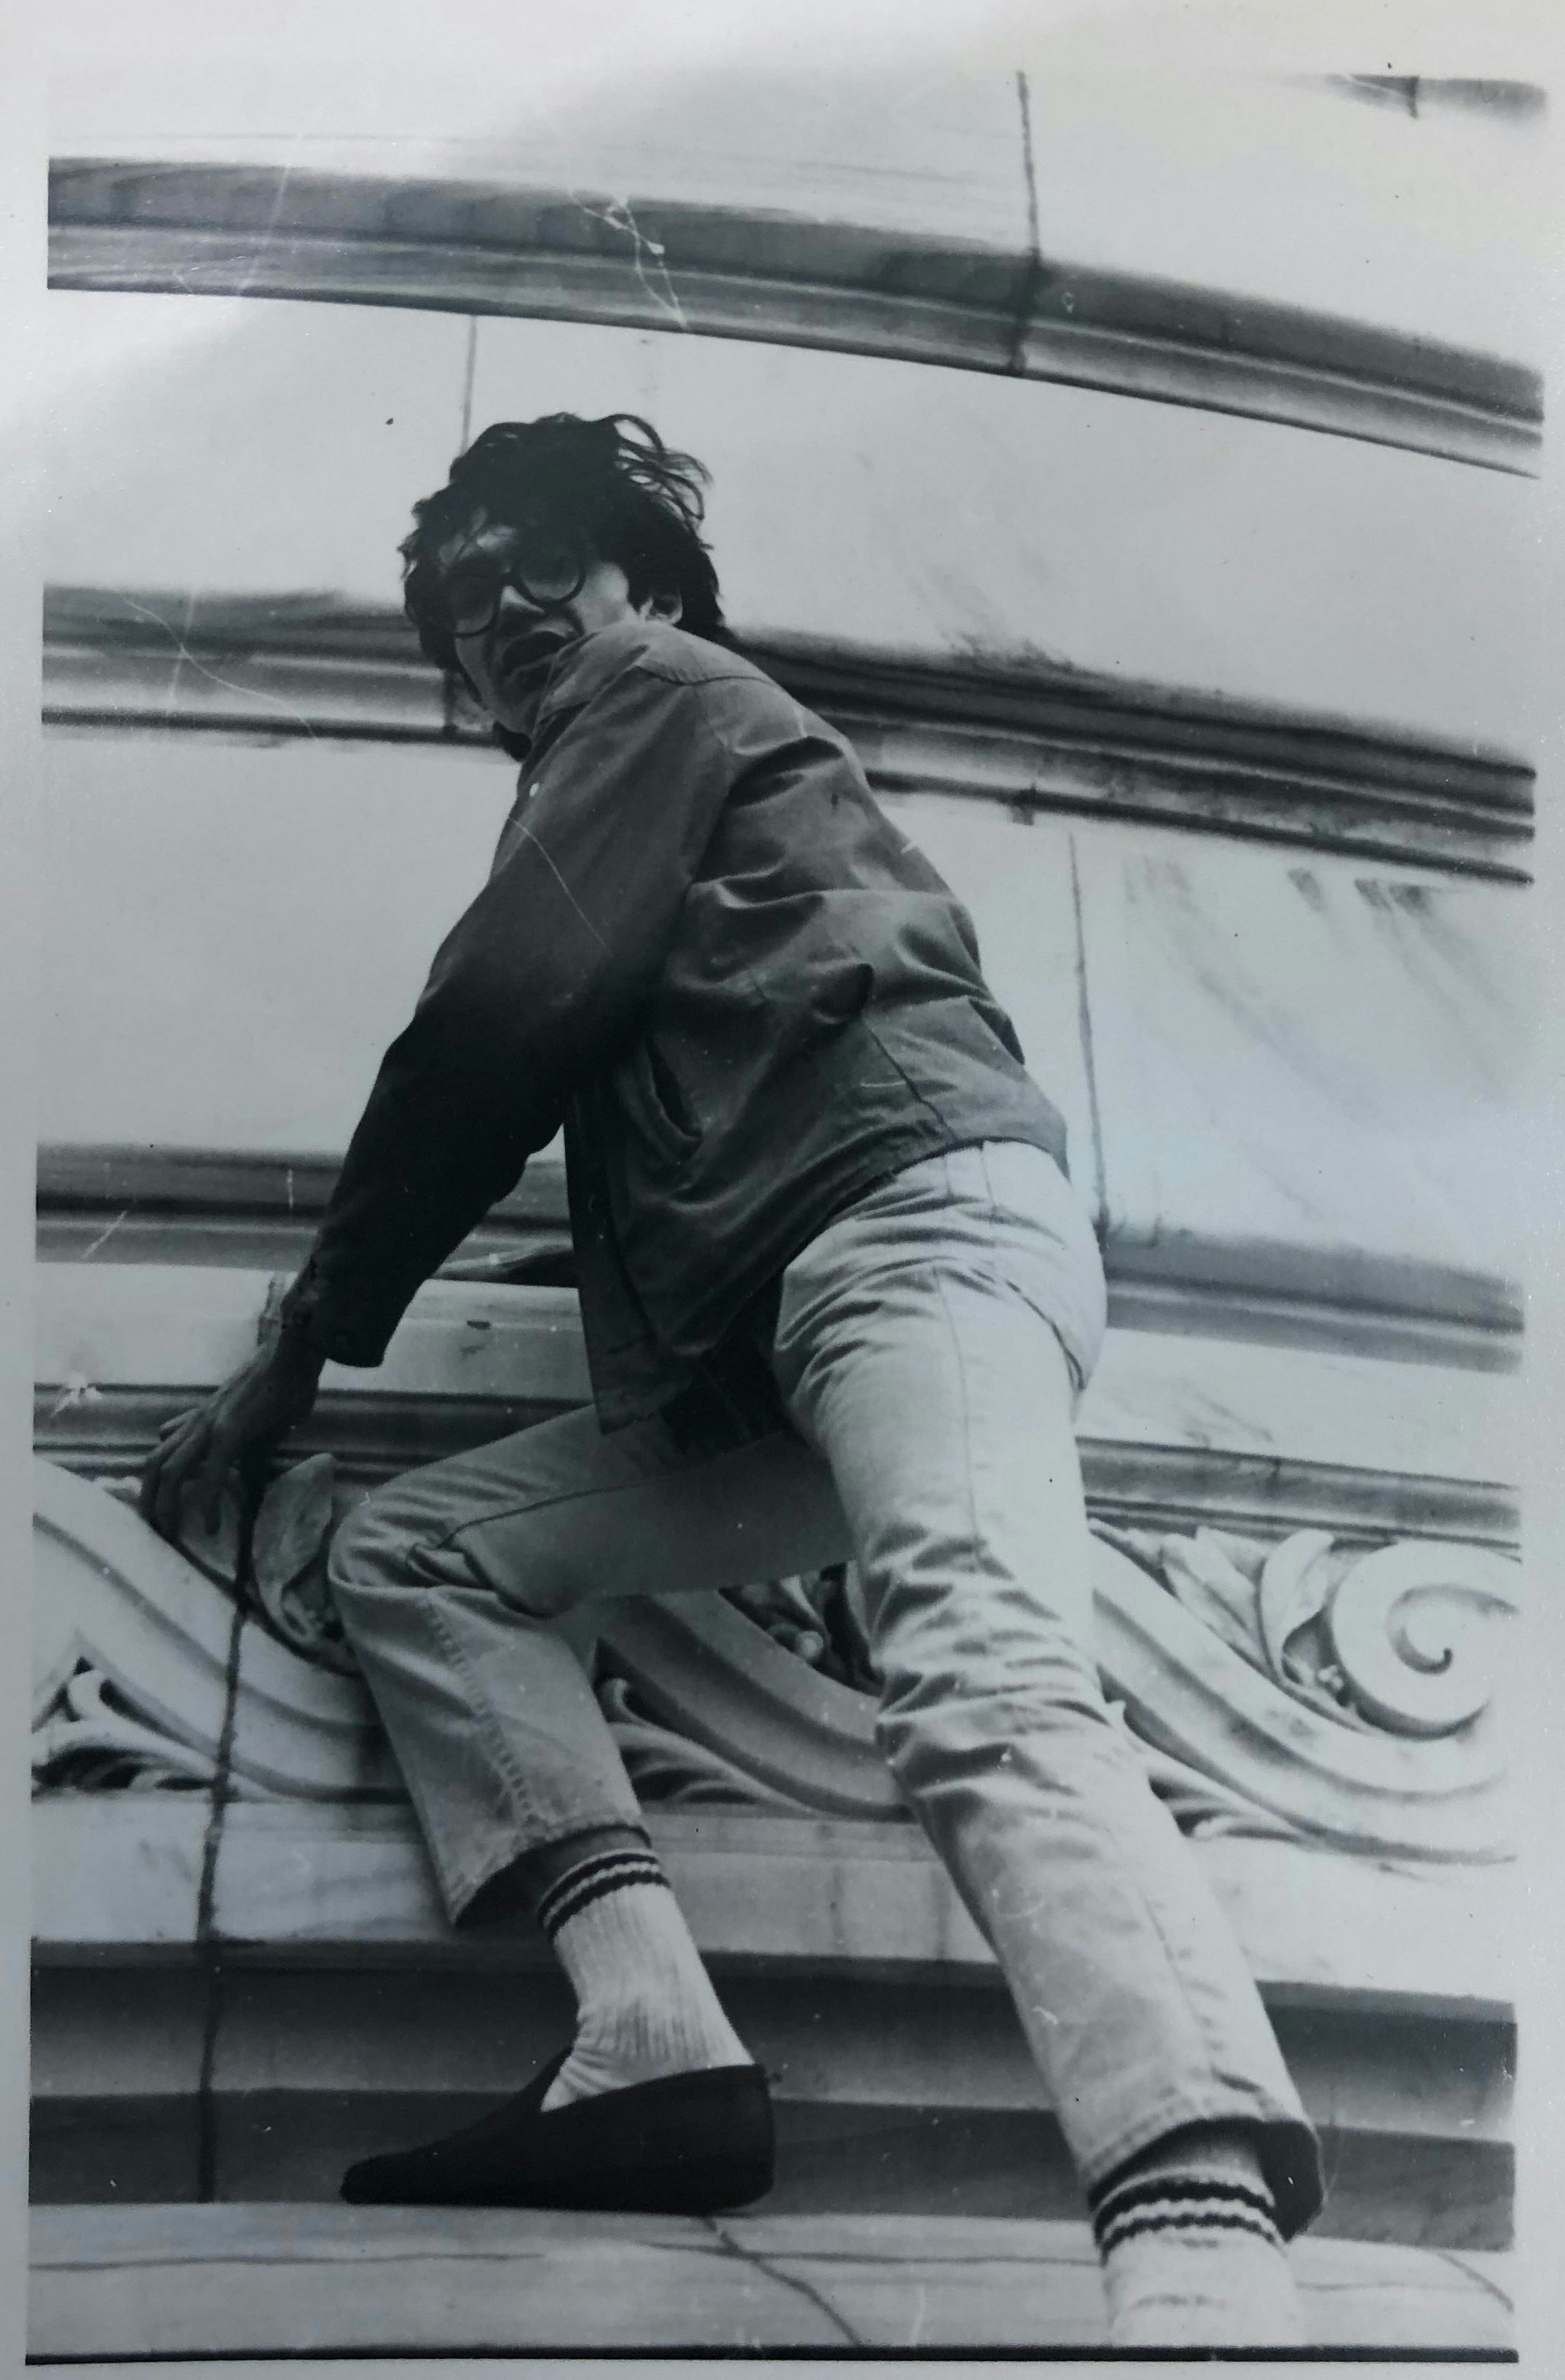 Photograph of Dick Gallup by Lorenz Gude, c. 1963-64, Raymond Danowski Poetry Library Collection, Stuart A. Rose Manuscript, Archives, and Rare Book Library, Emory University.